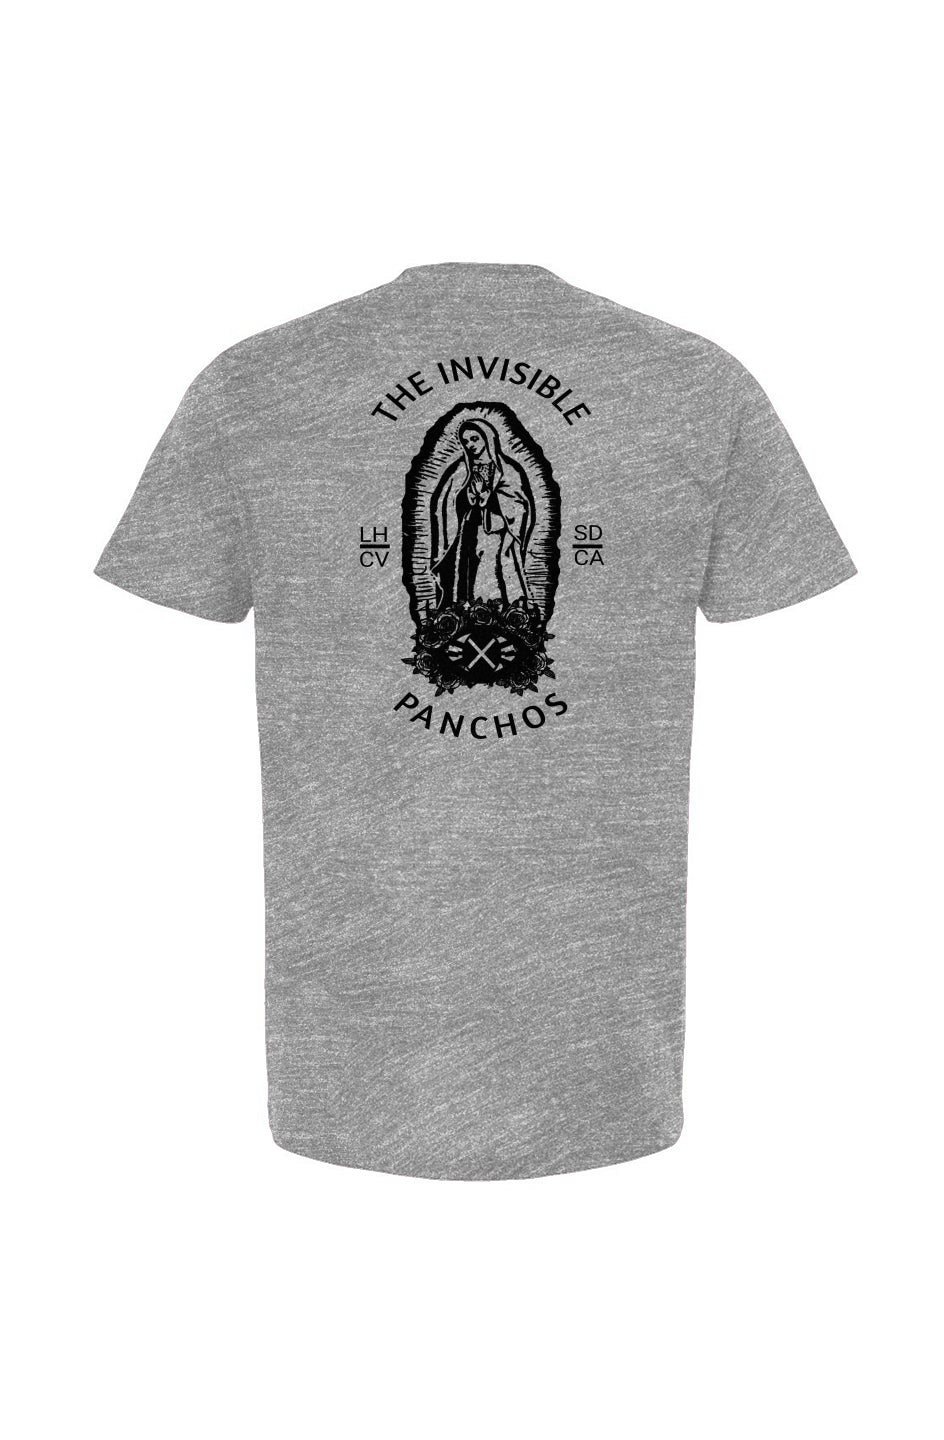 The Invisible Panchos Mother T- Black/ Heather 